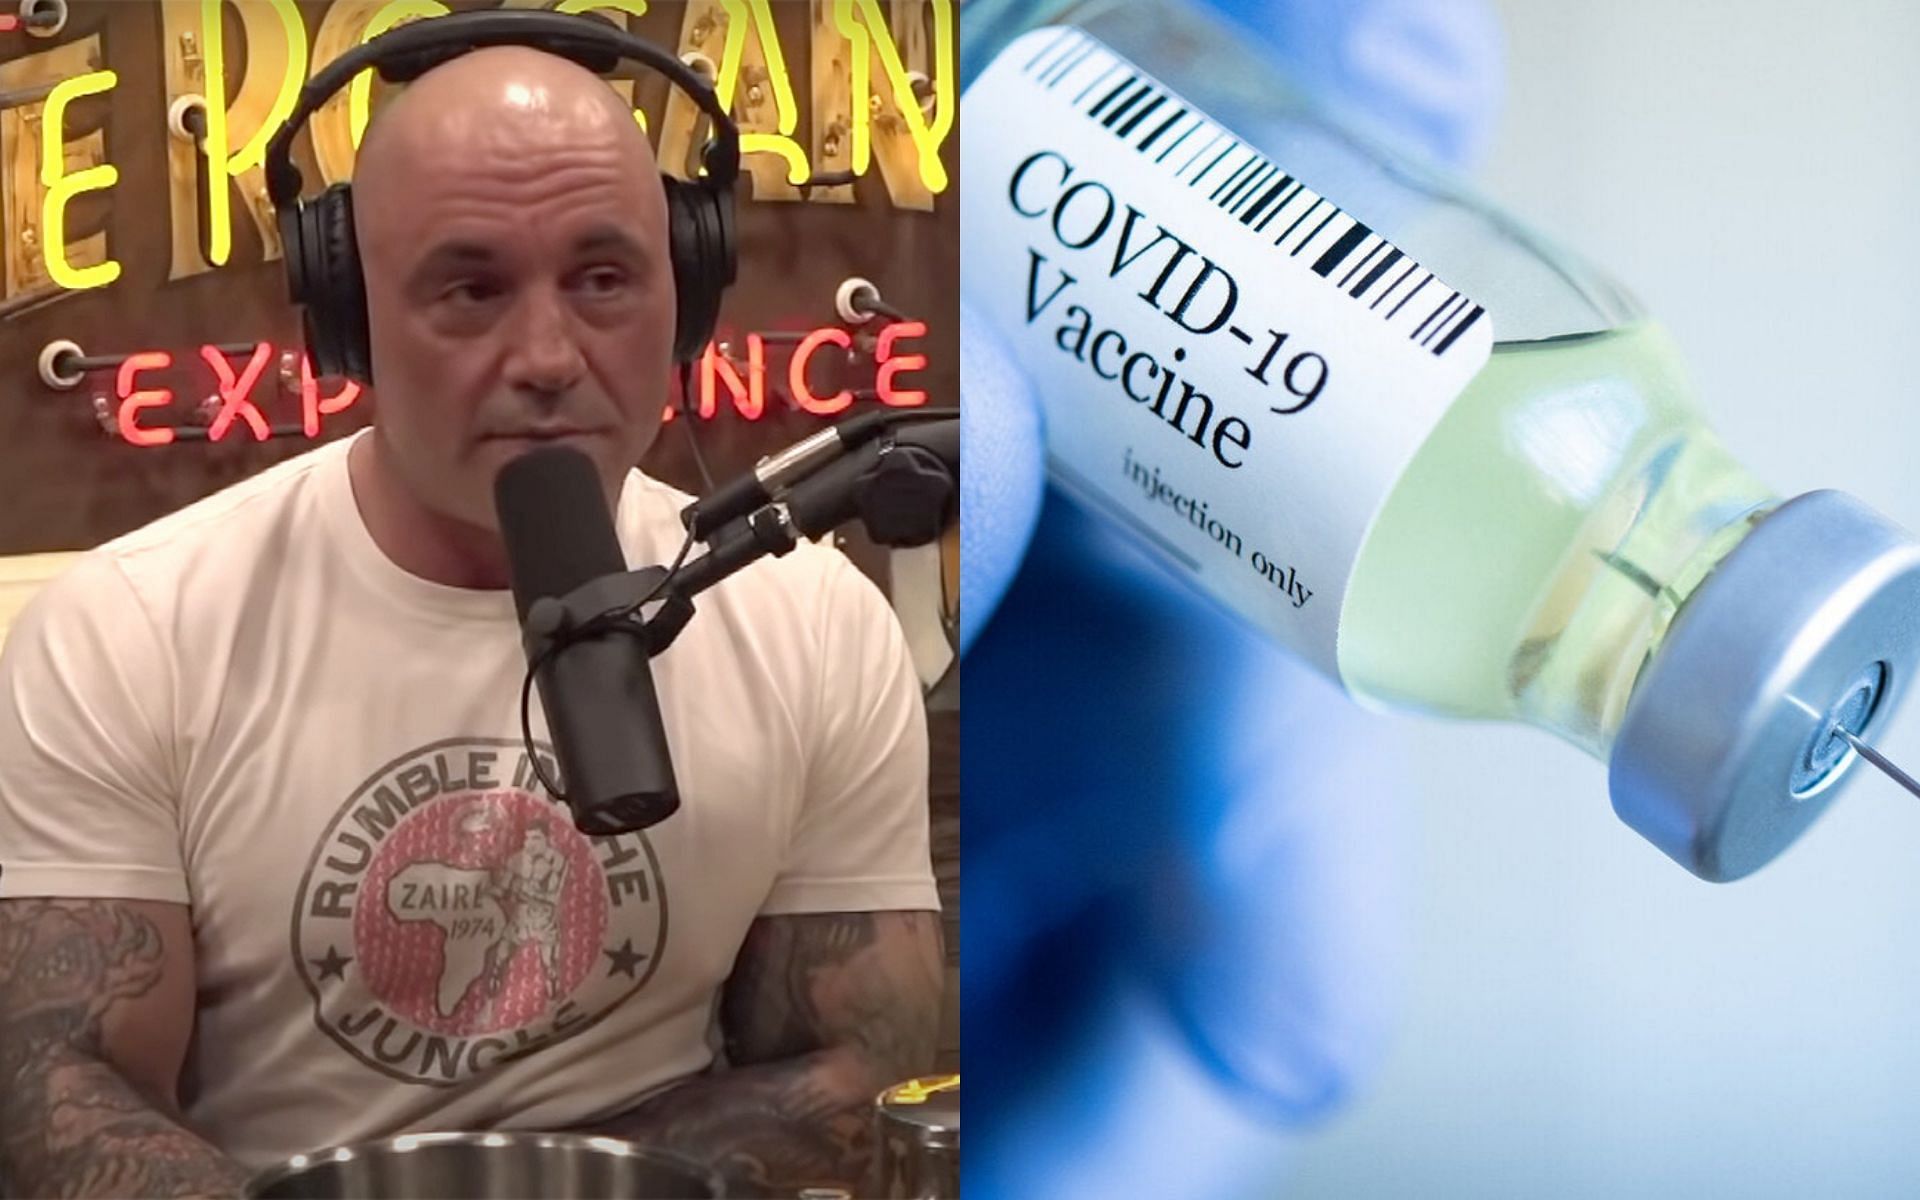 Joe Rogan is not against the COVID-19 vaccine [Image credit: YouTube, JRE Clips]